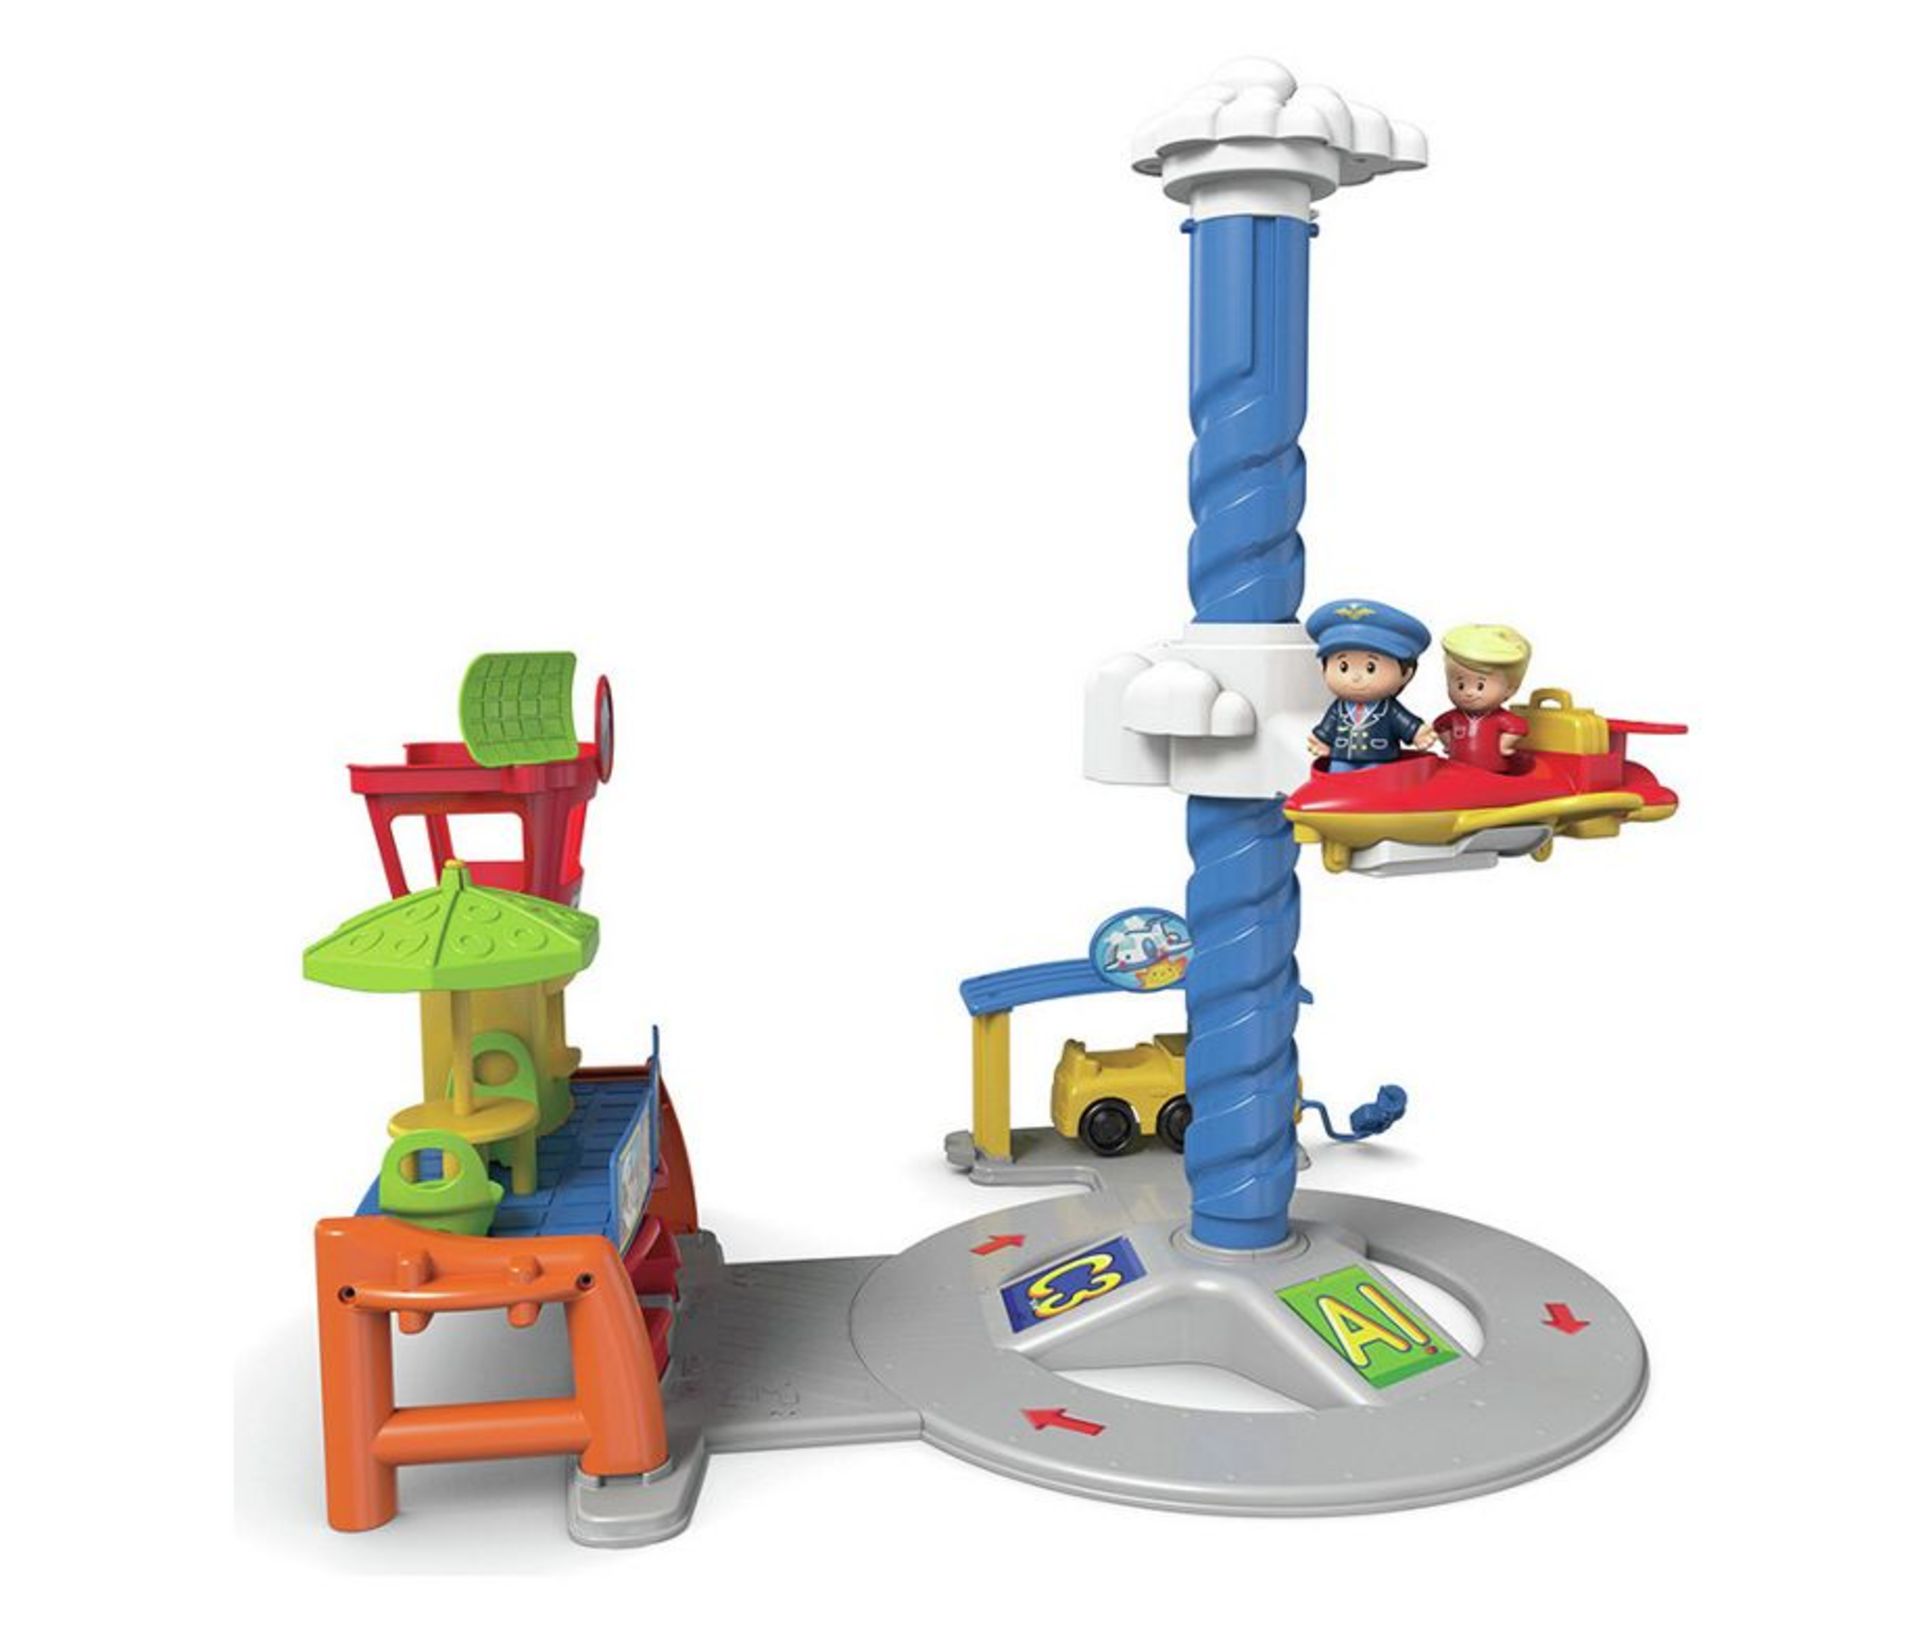 V *TRADE QTY* Brand New Fisher Price Little People Spinnin' Sounds Airport ISP - £23.99 X 4 YOUR BID